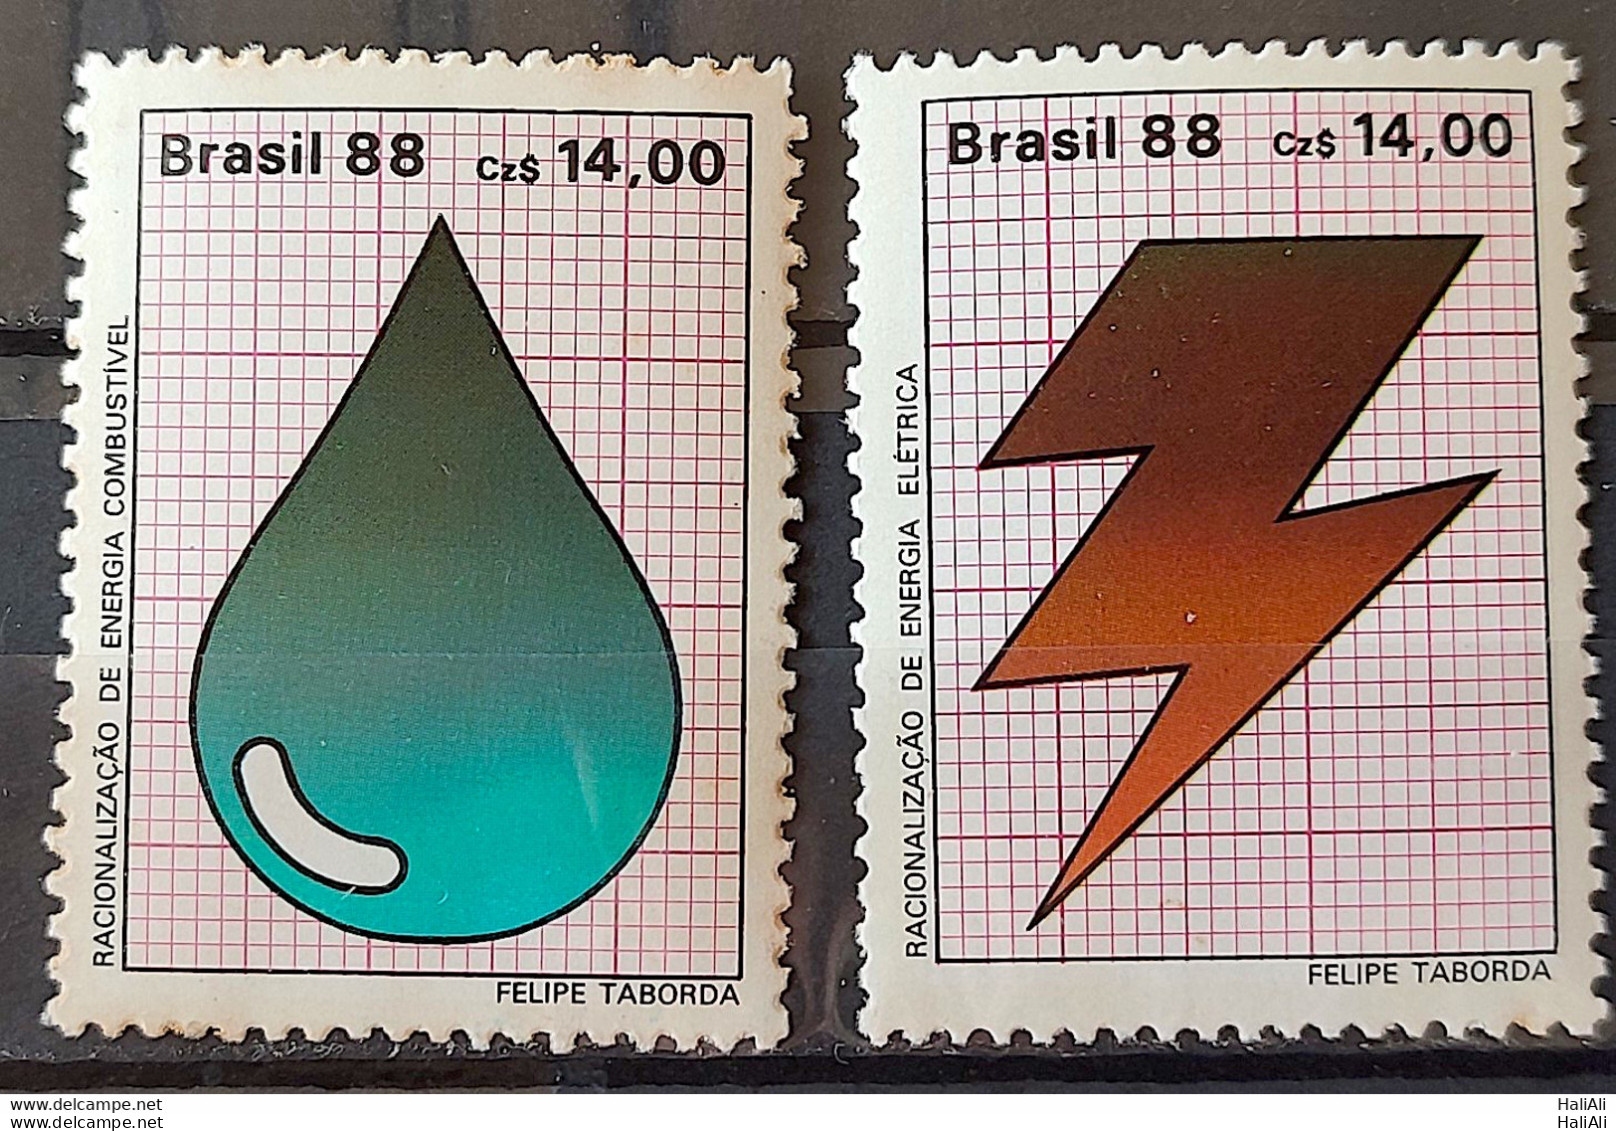 C 1579 Brazil Stamp Rationalization Of Petroleum Energy Electricity 1988 Complete Series 2 - Nuevos